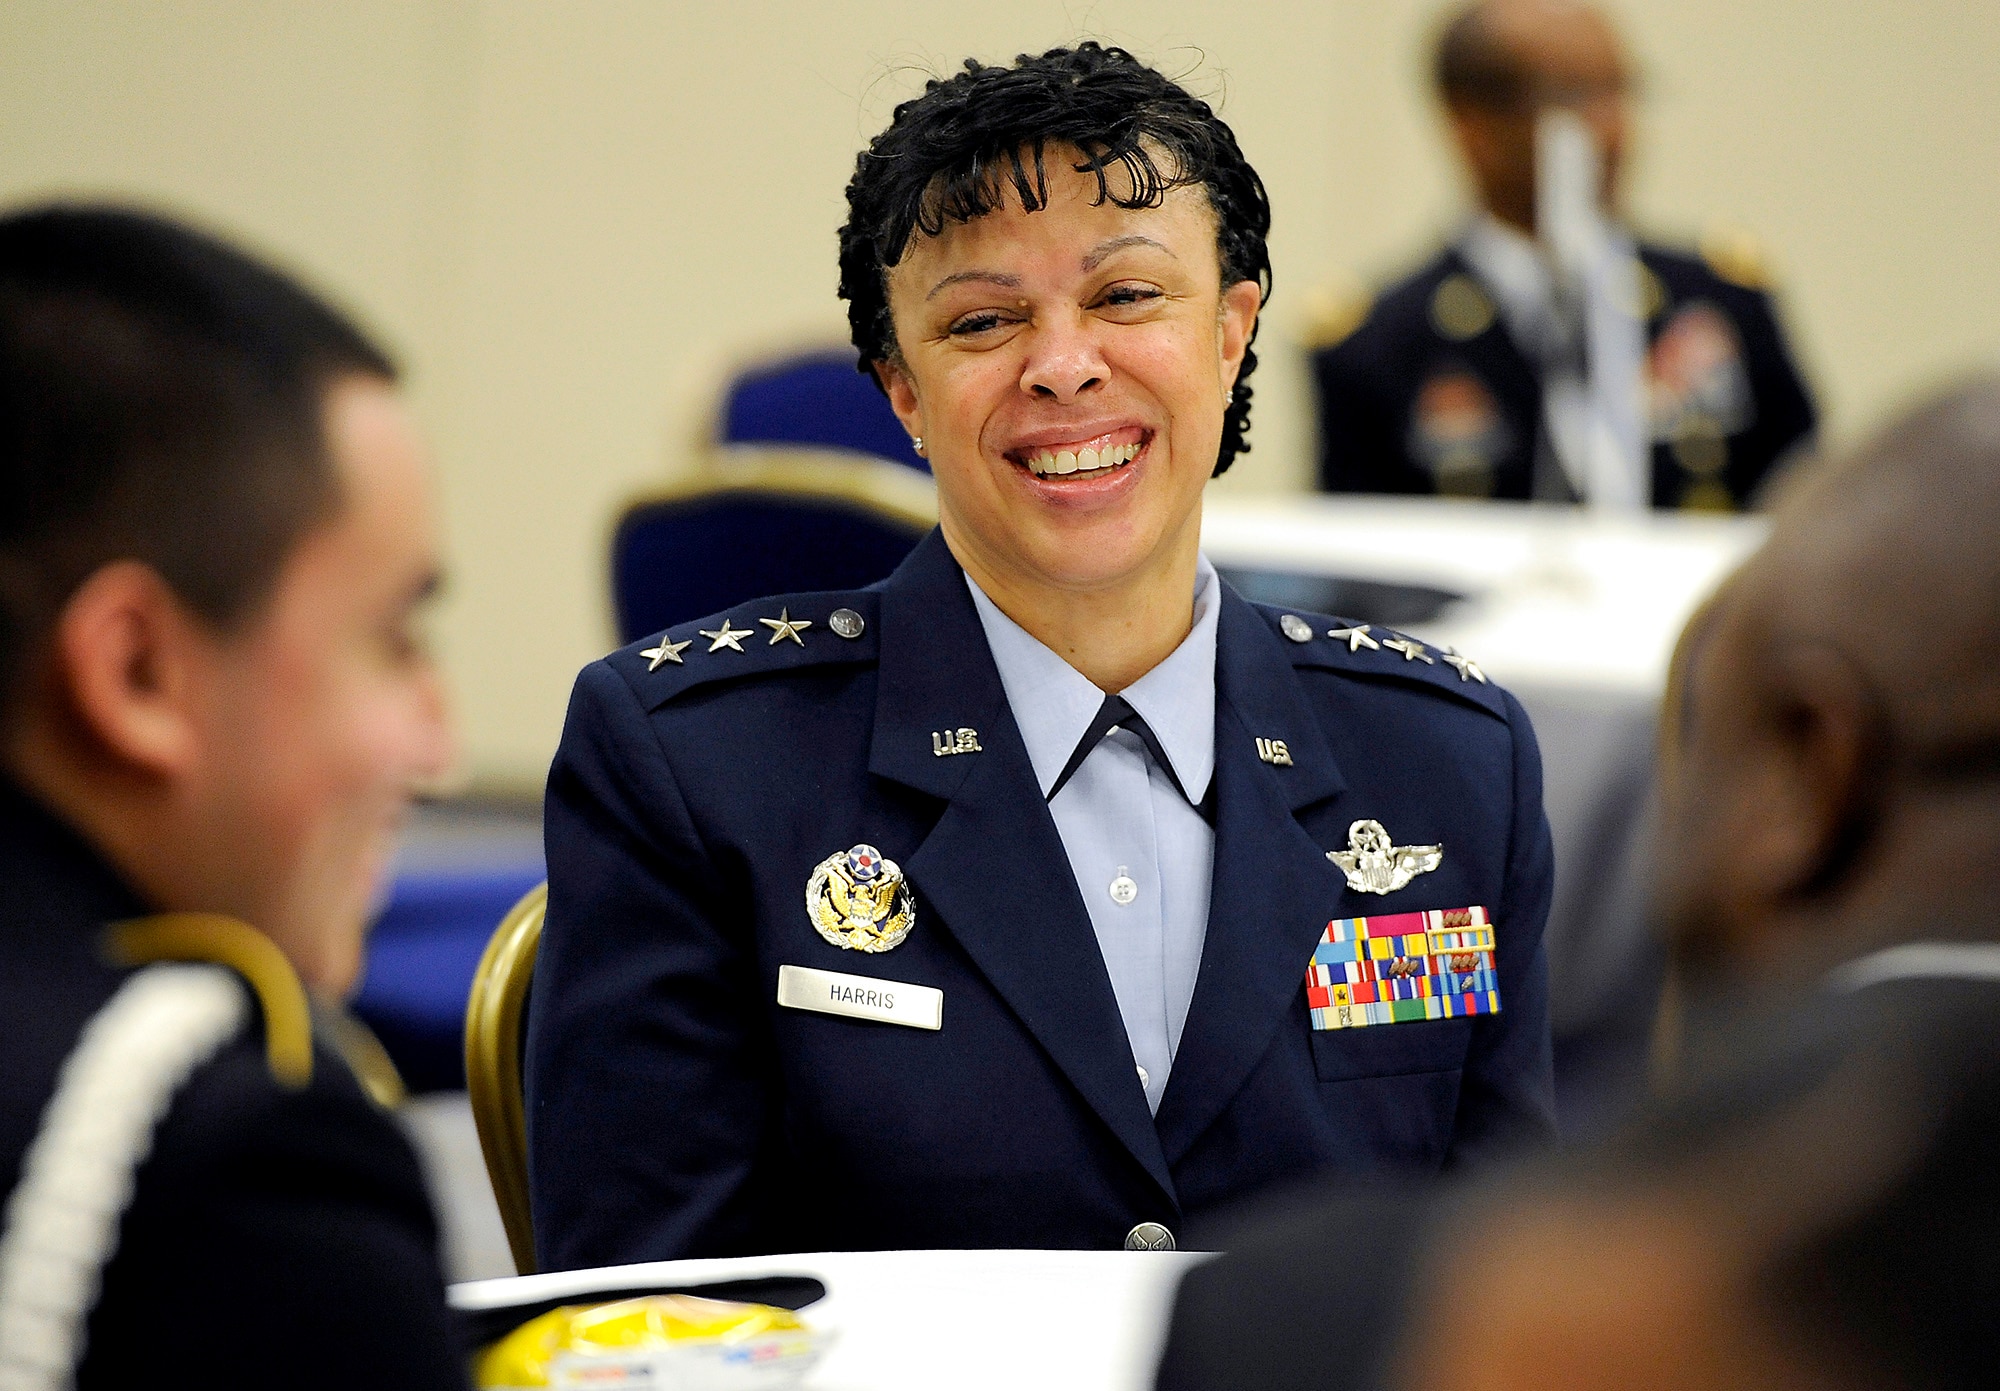 Lt. Gen. Stayce Harris, the Air Force assistant vice chief of staff, mentors high school students during the Black Engineer of the Year Awards Science, Technology, Engineering and Mathematics Conferences' Stars and Stripes ceremony Feb. 10, 2017, in Washington, D.C. (U.S. Air Force photo/Tech. Sgt. Robert Barnett)